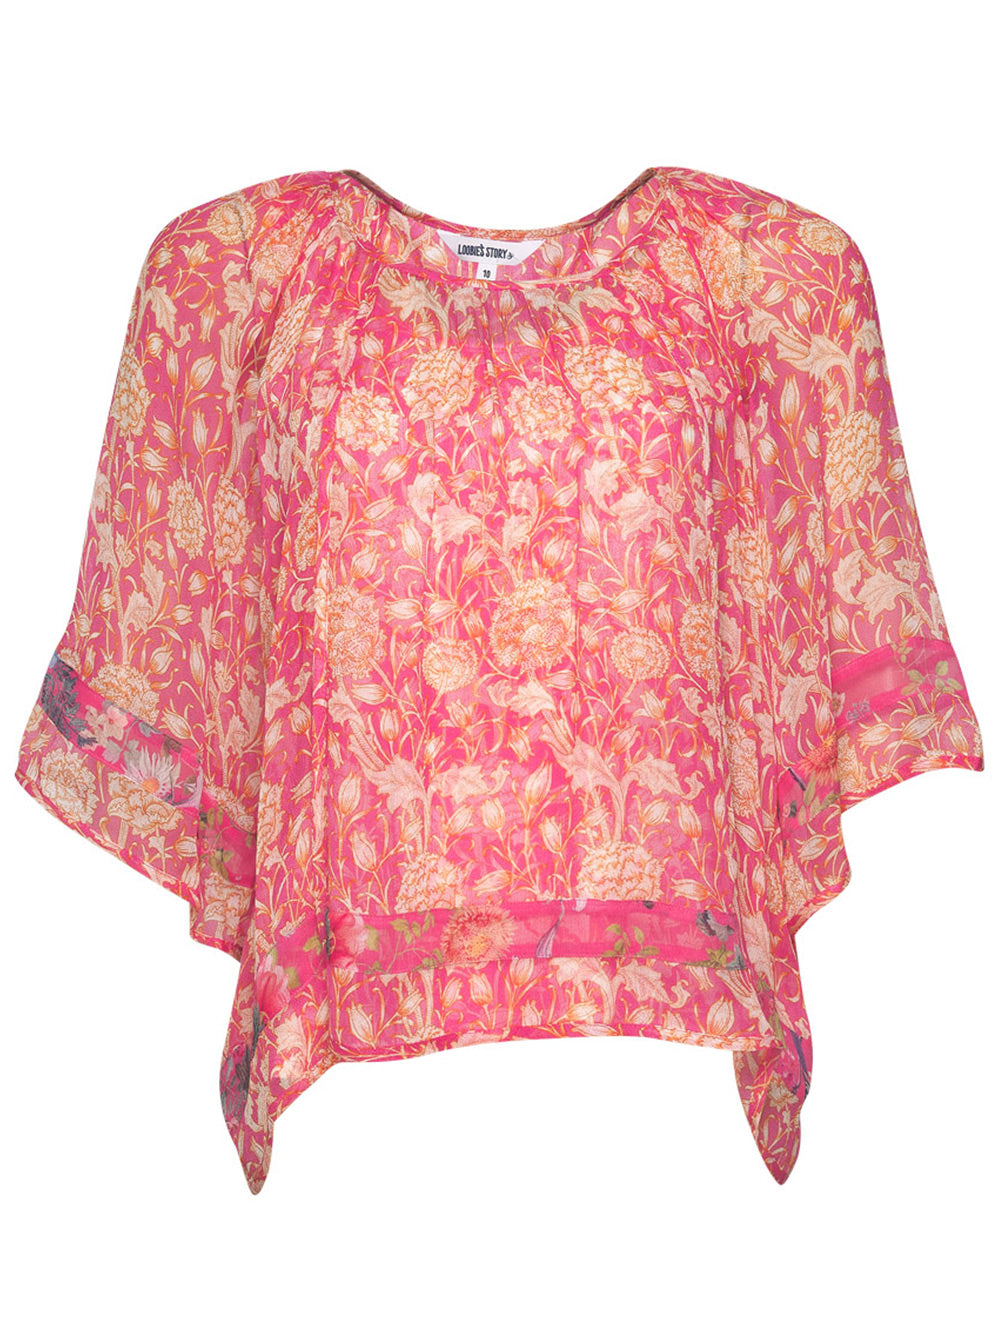 LOOBIE'S STORY CHANTILLY TOP